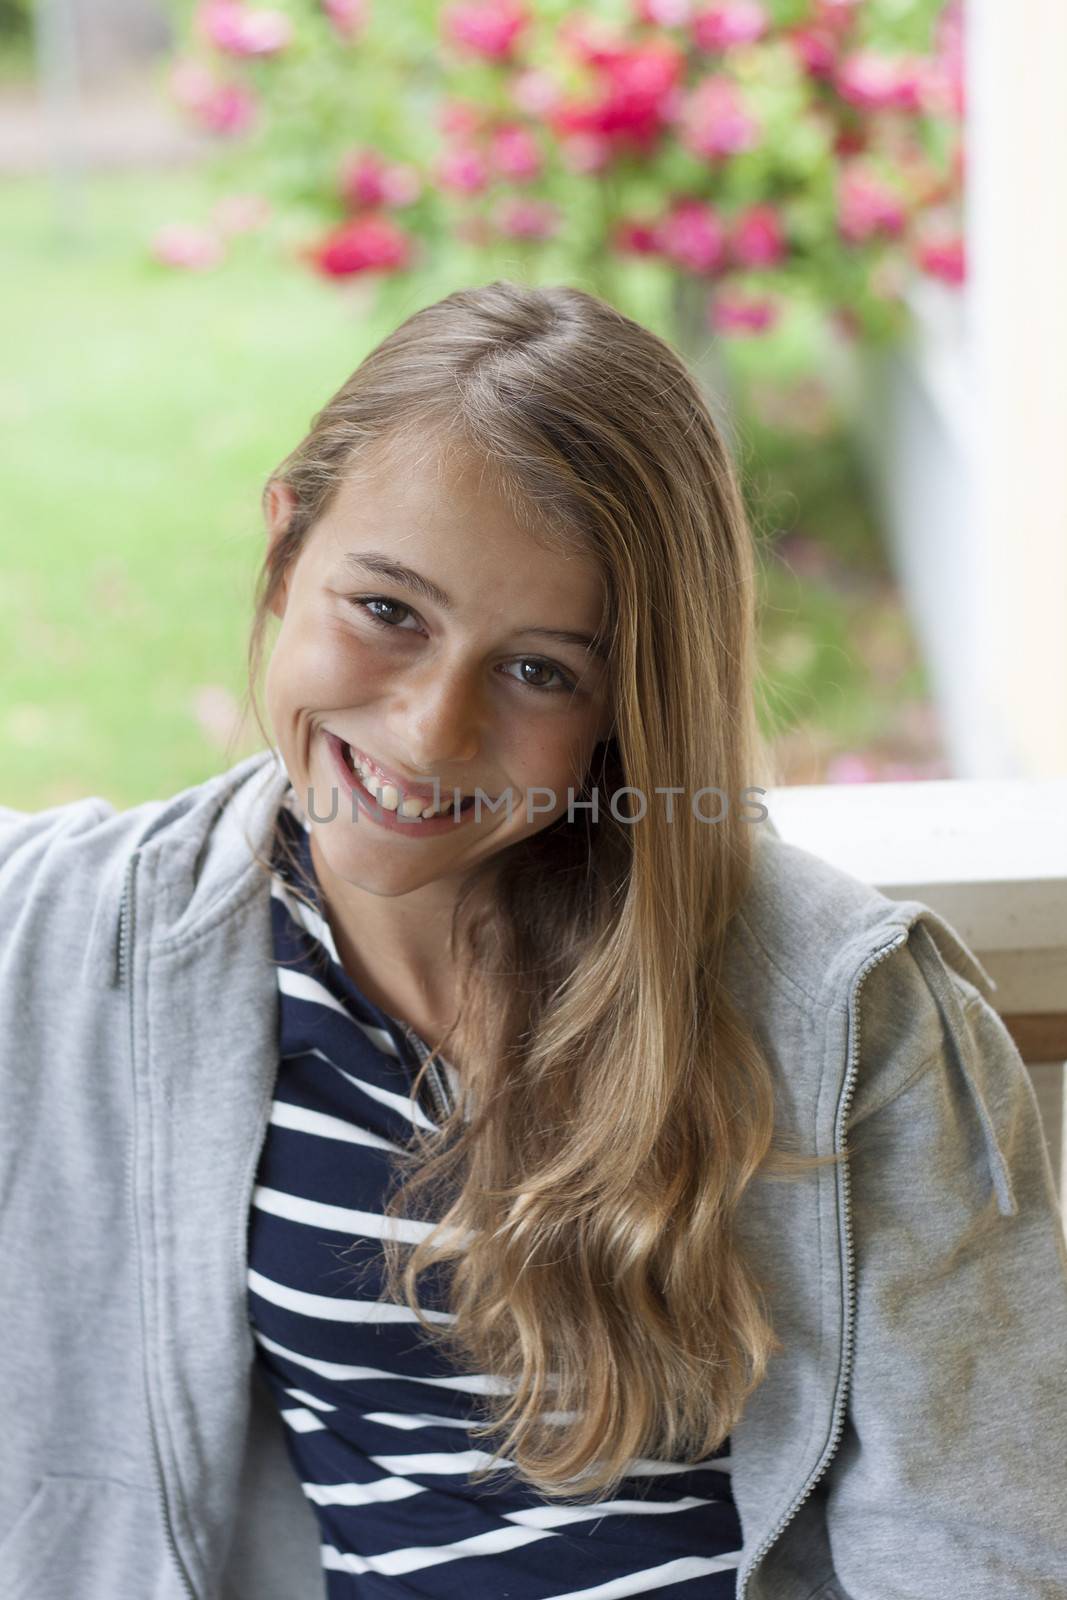 A confident modern and relaxed teen laughing out loud